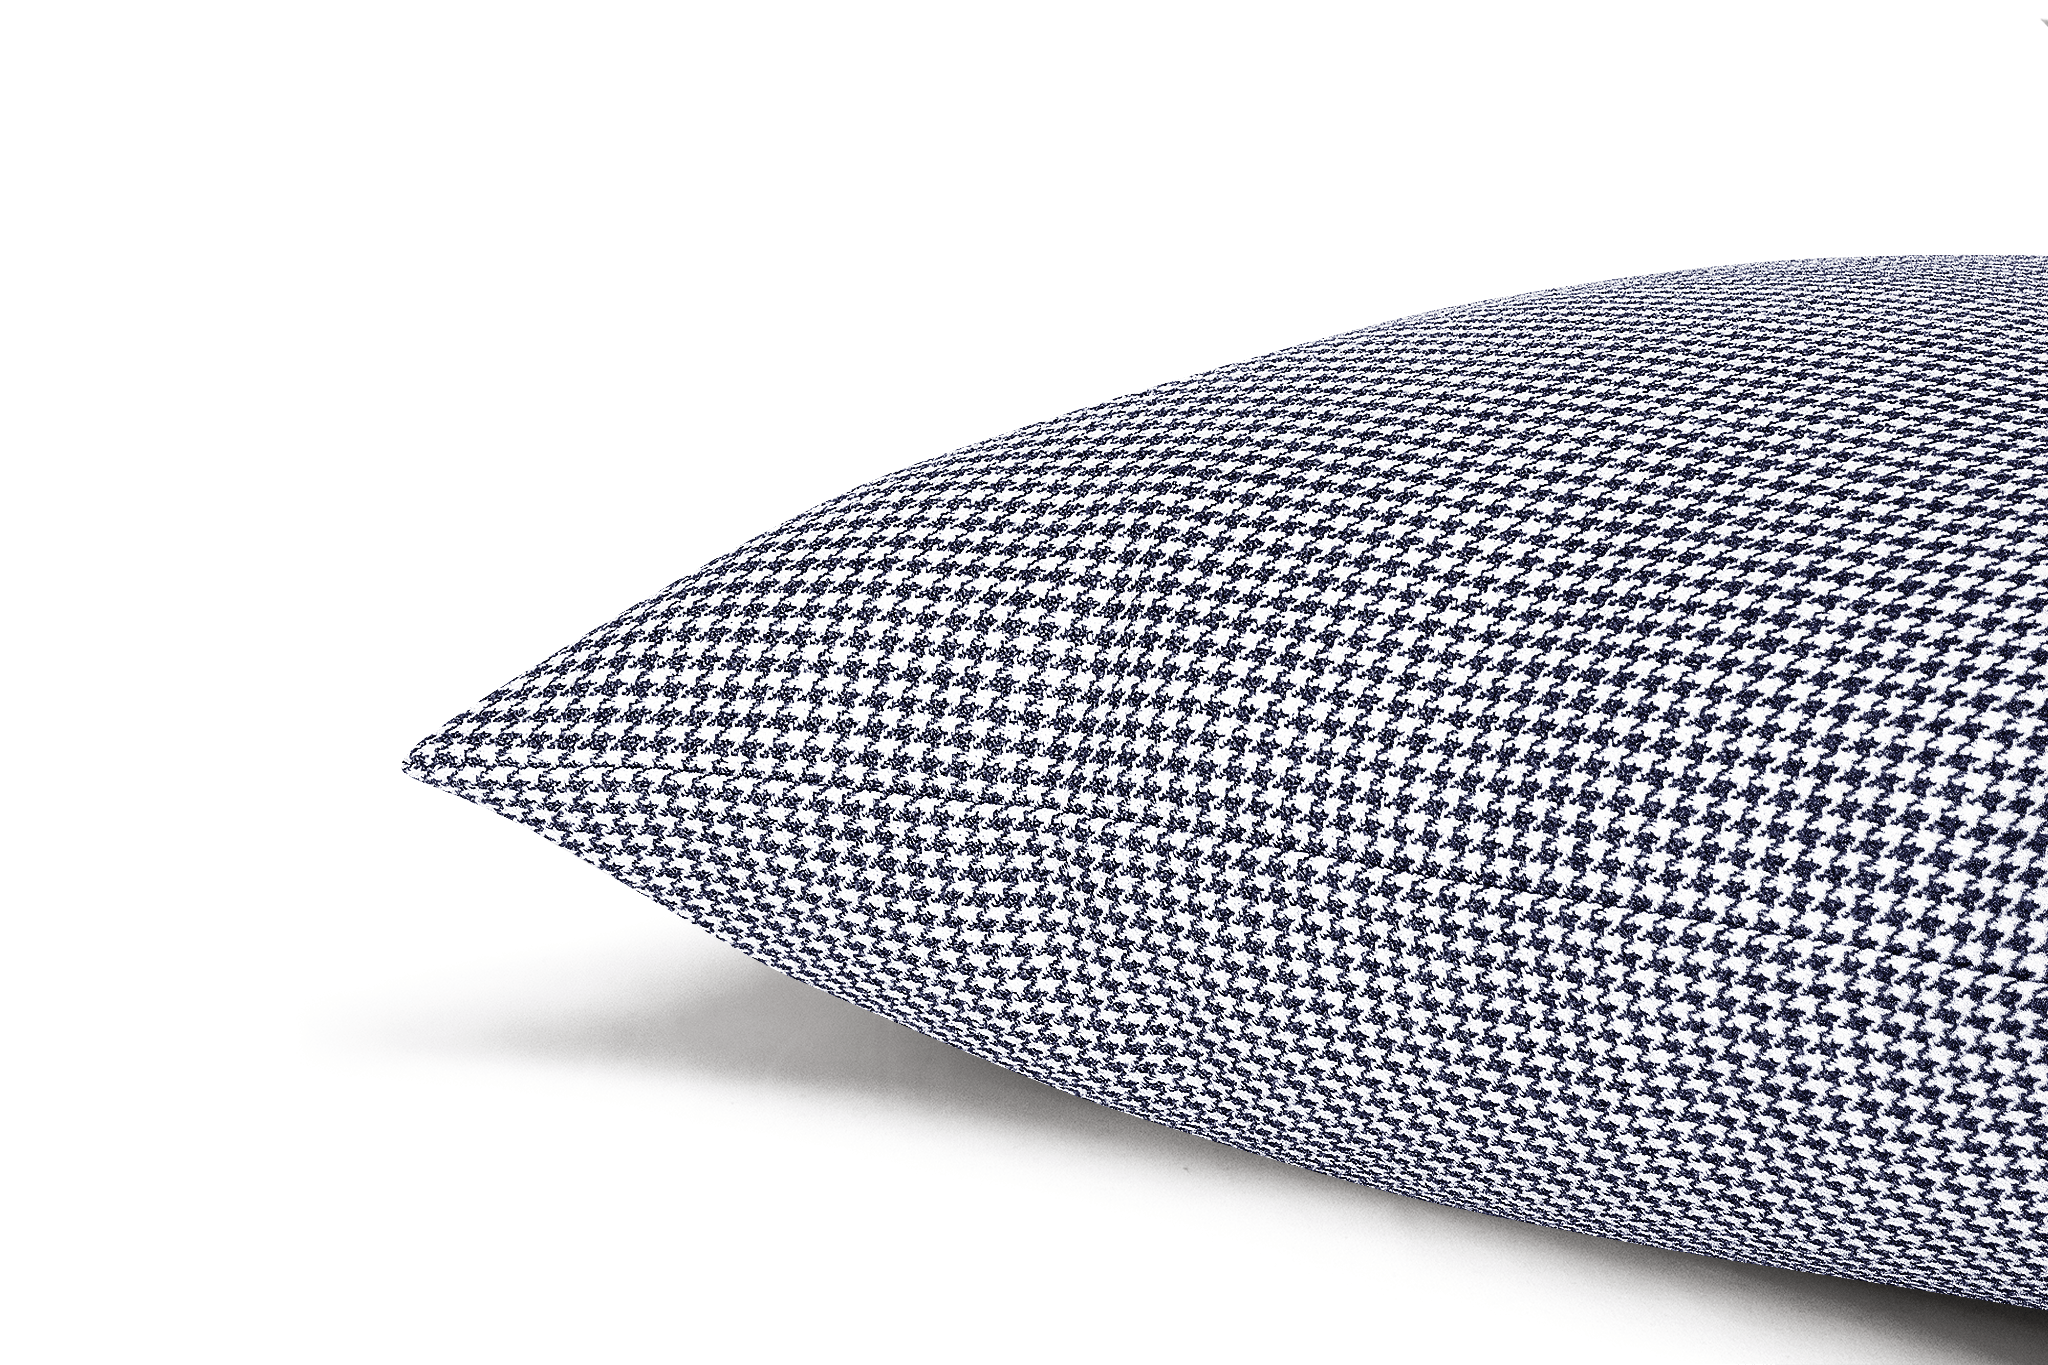 Indigo Houndstooth Cushion Cover Cushion Cover Canadian Down & Feather Company 